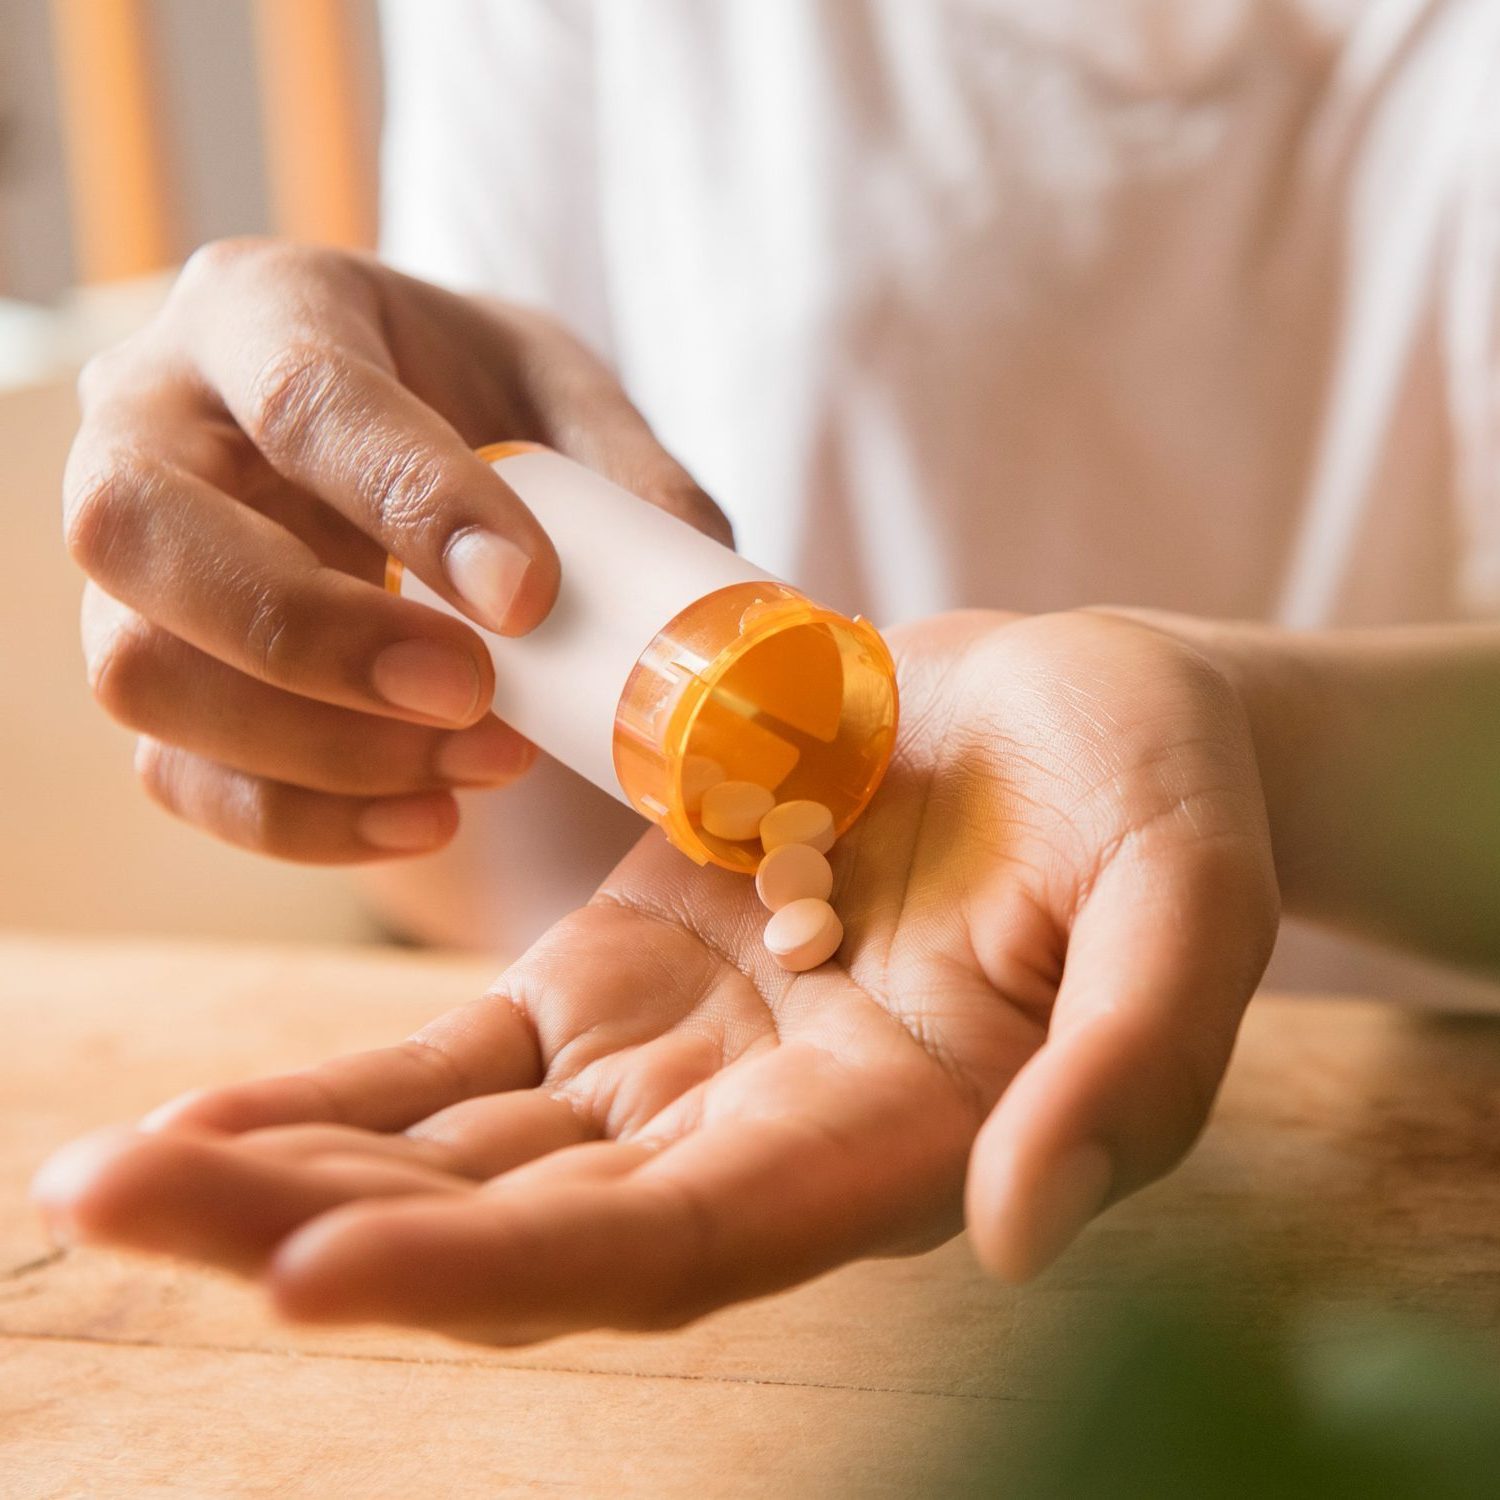 Elderly woman spilling antibiotics into her hand from a pill bottle